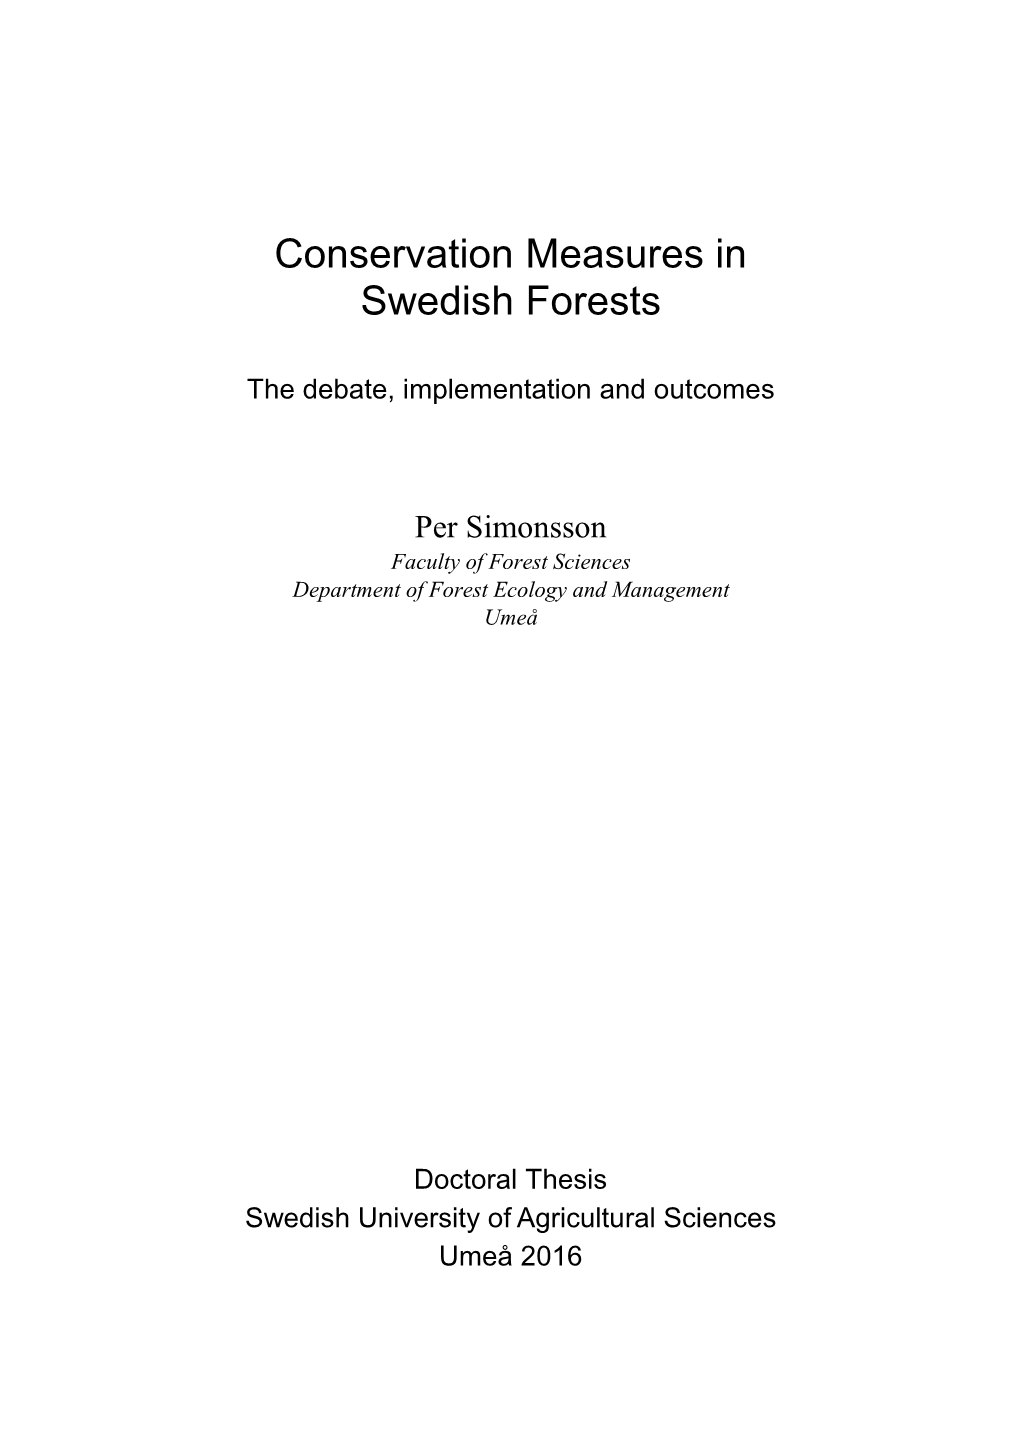 Conservation Measures in Swedish Forests